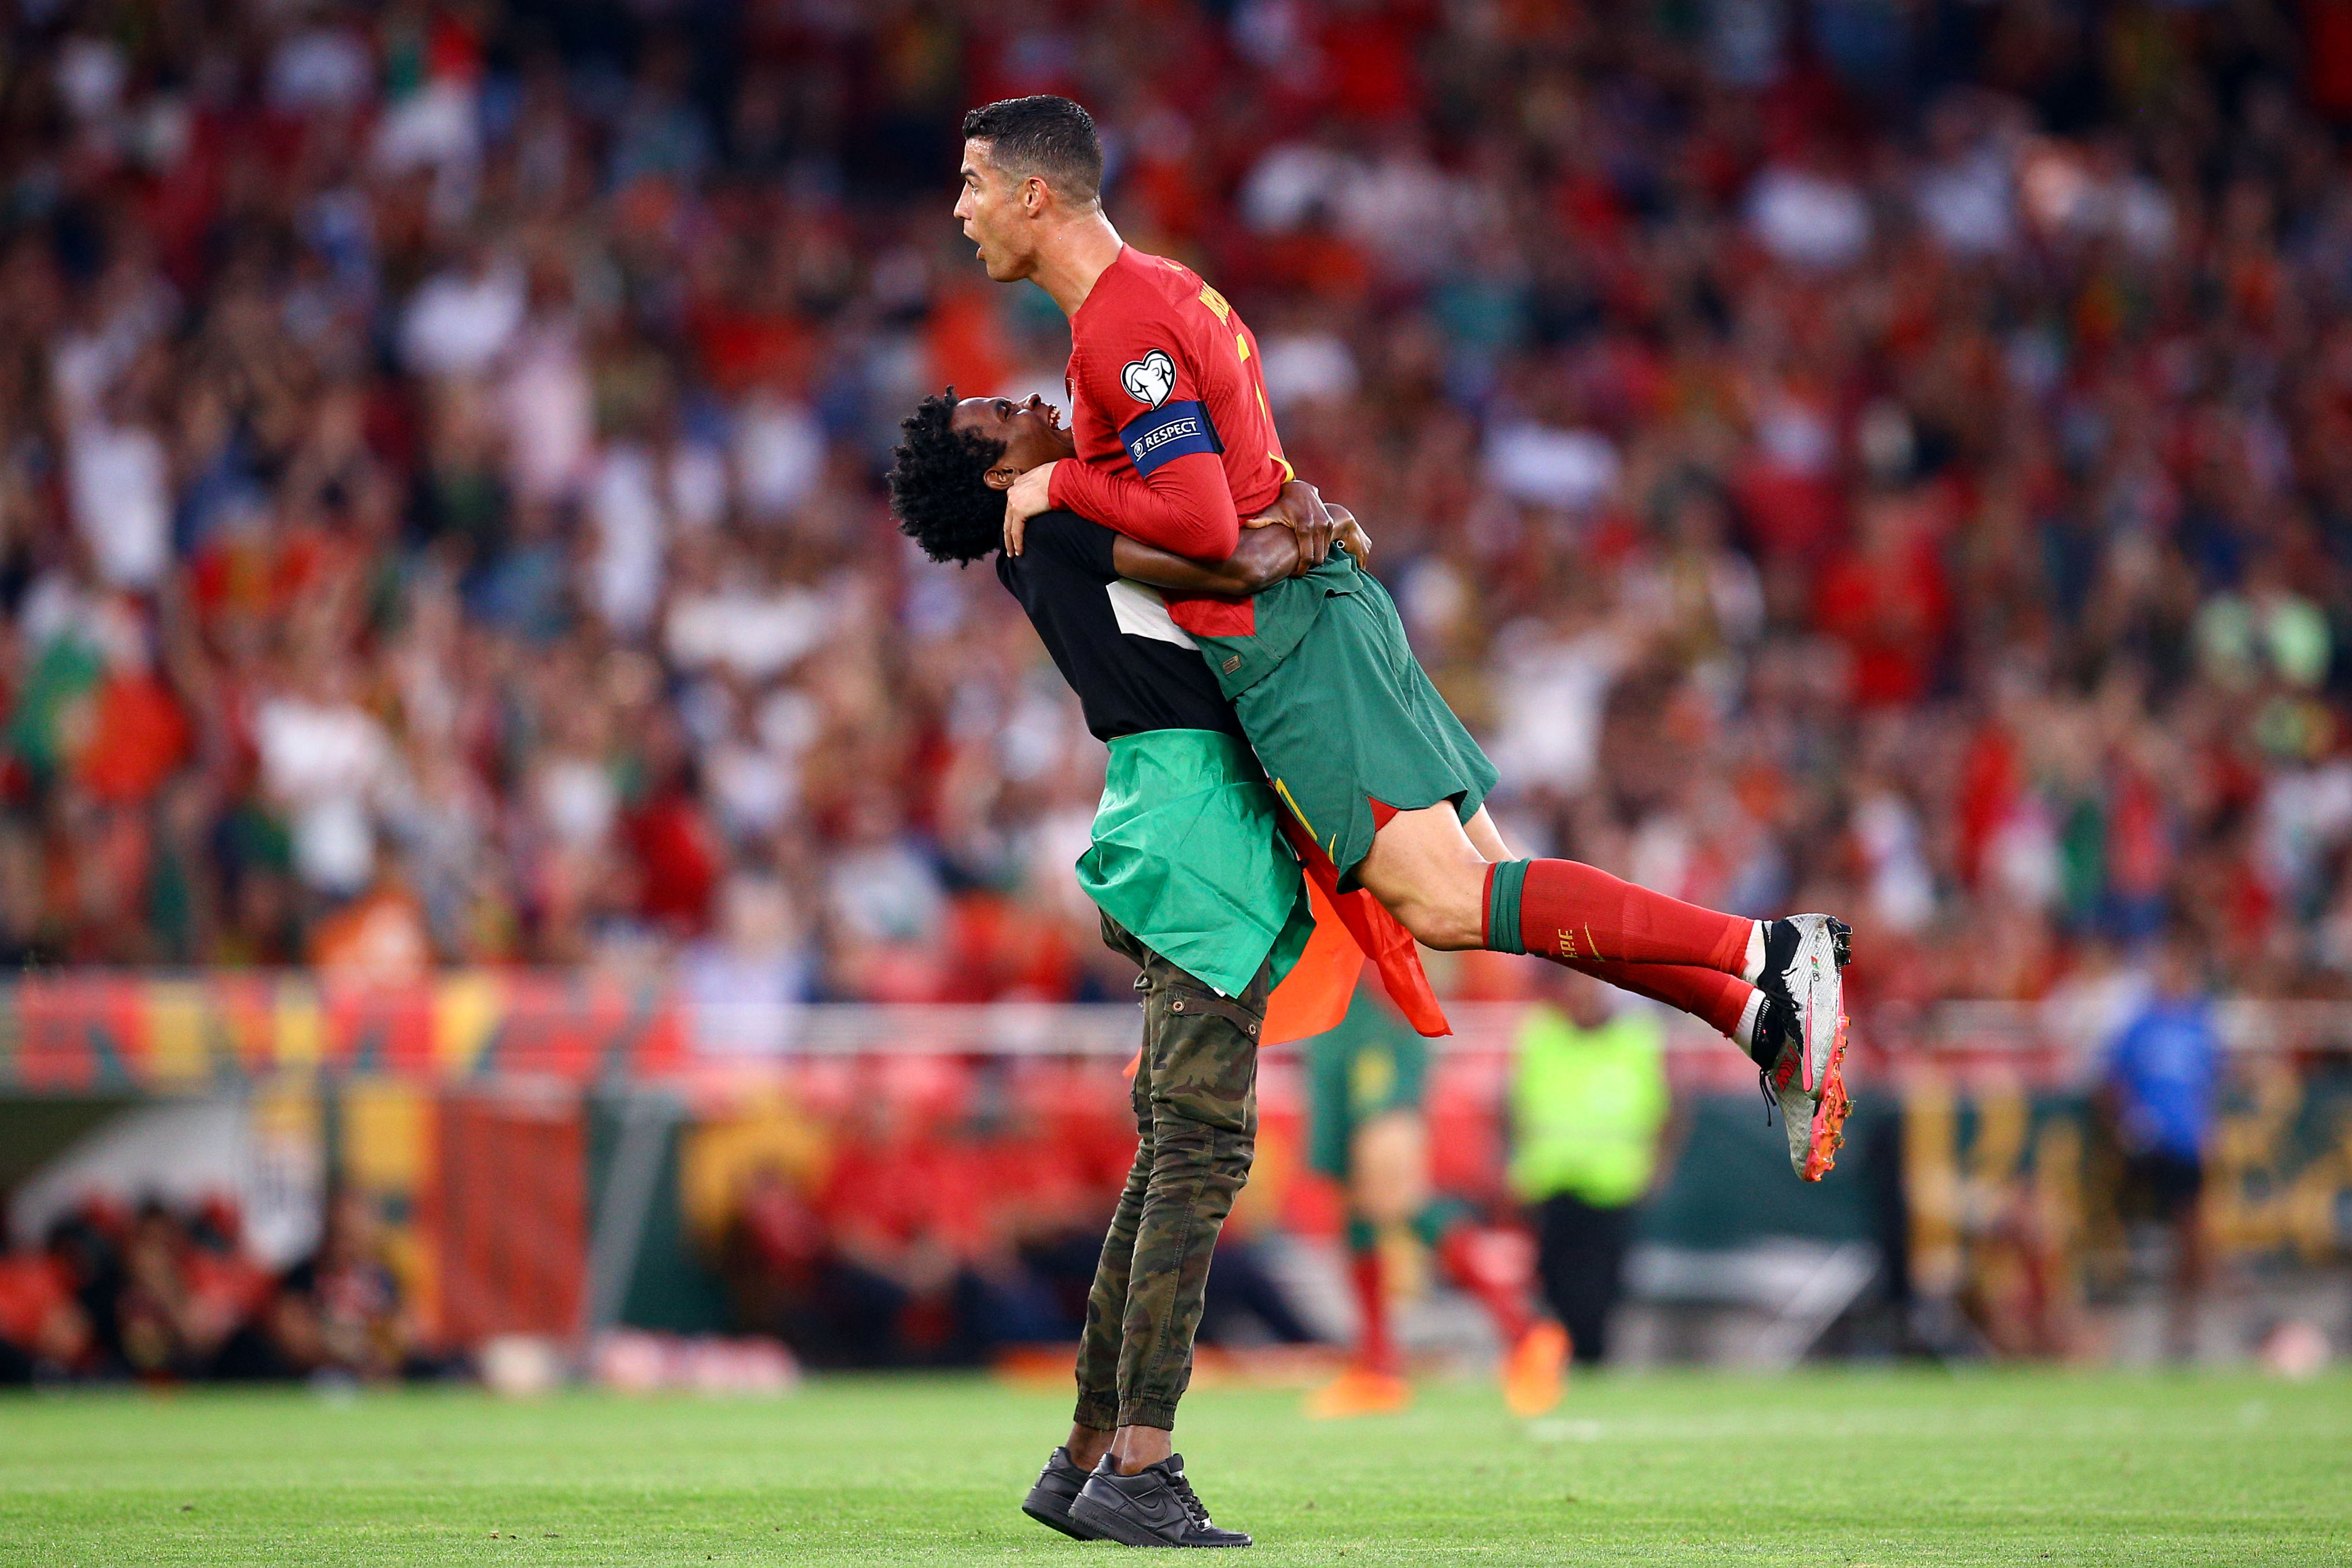 The Astonishing Moment When Ronaldo Was Lifted by a Pitch Intruder During Portugal's Euro Qualifier Against Bosnia 2